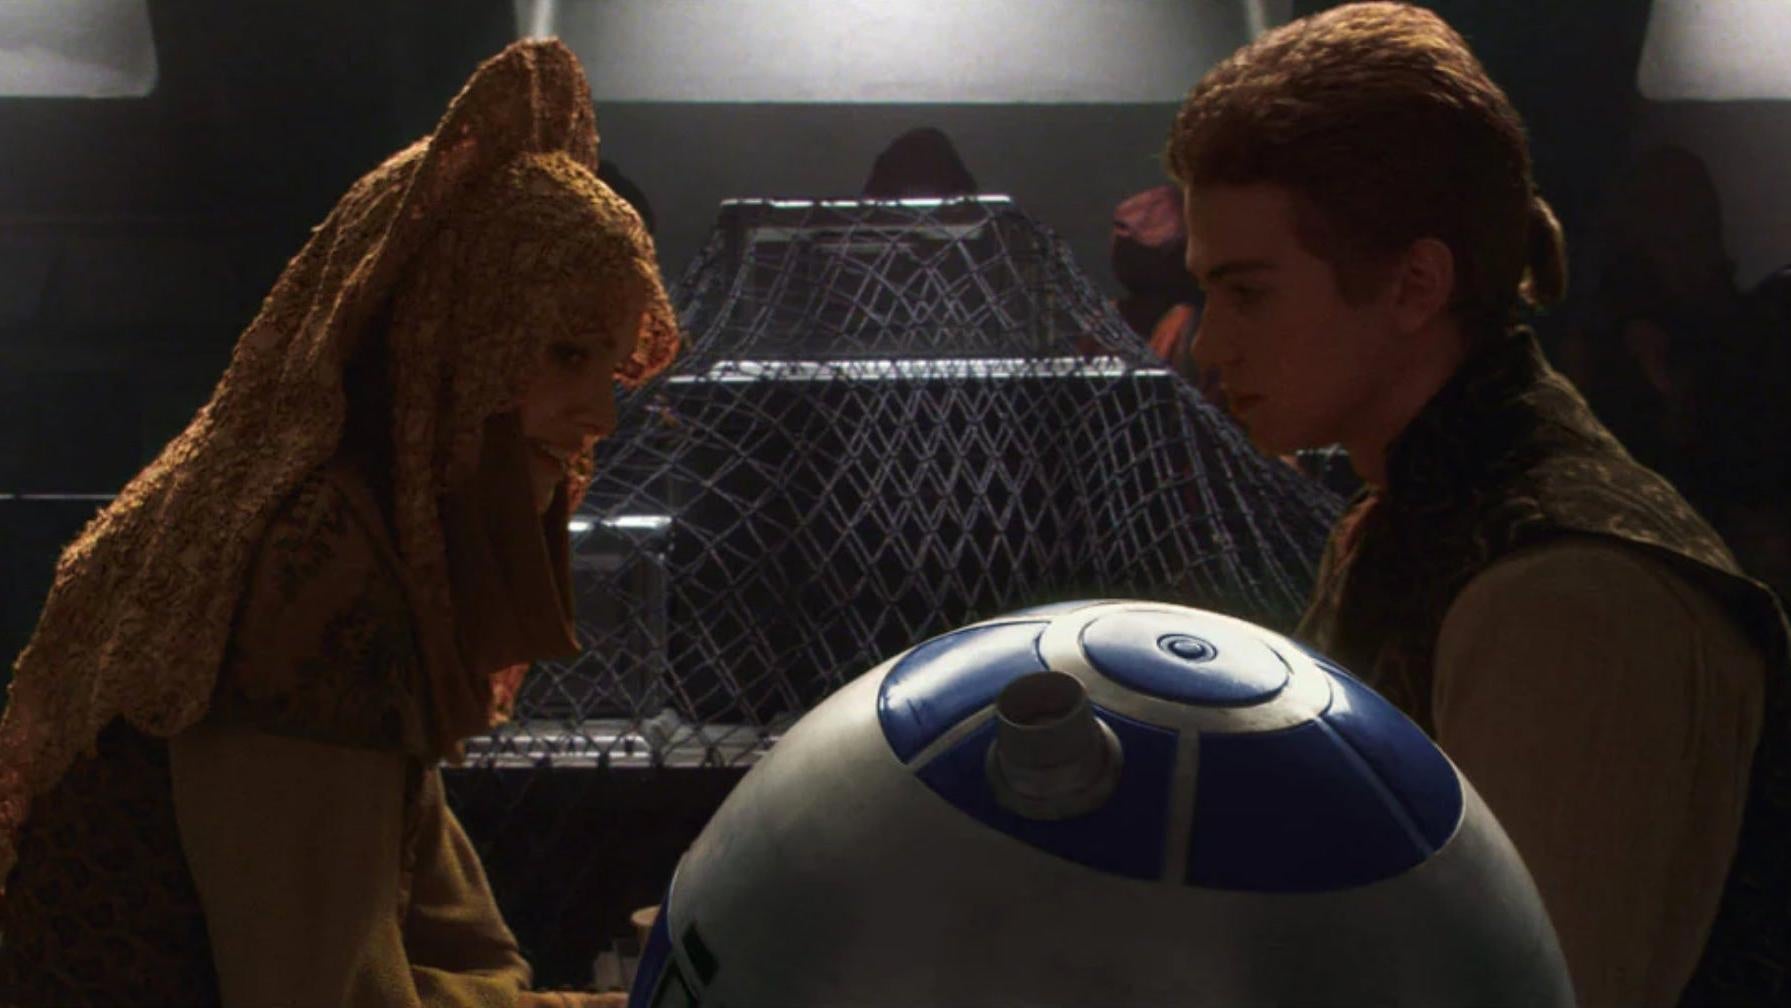 Oh forbidden love. (Image: Lucasfilm)